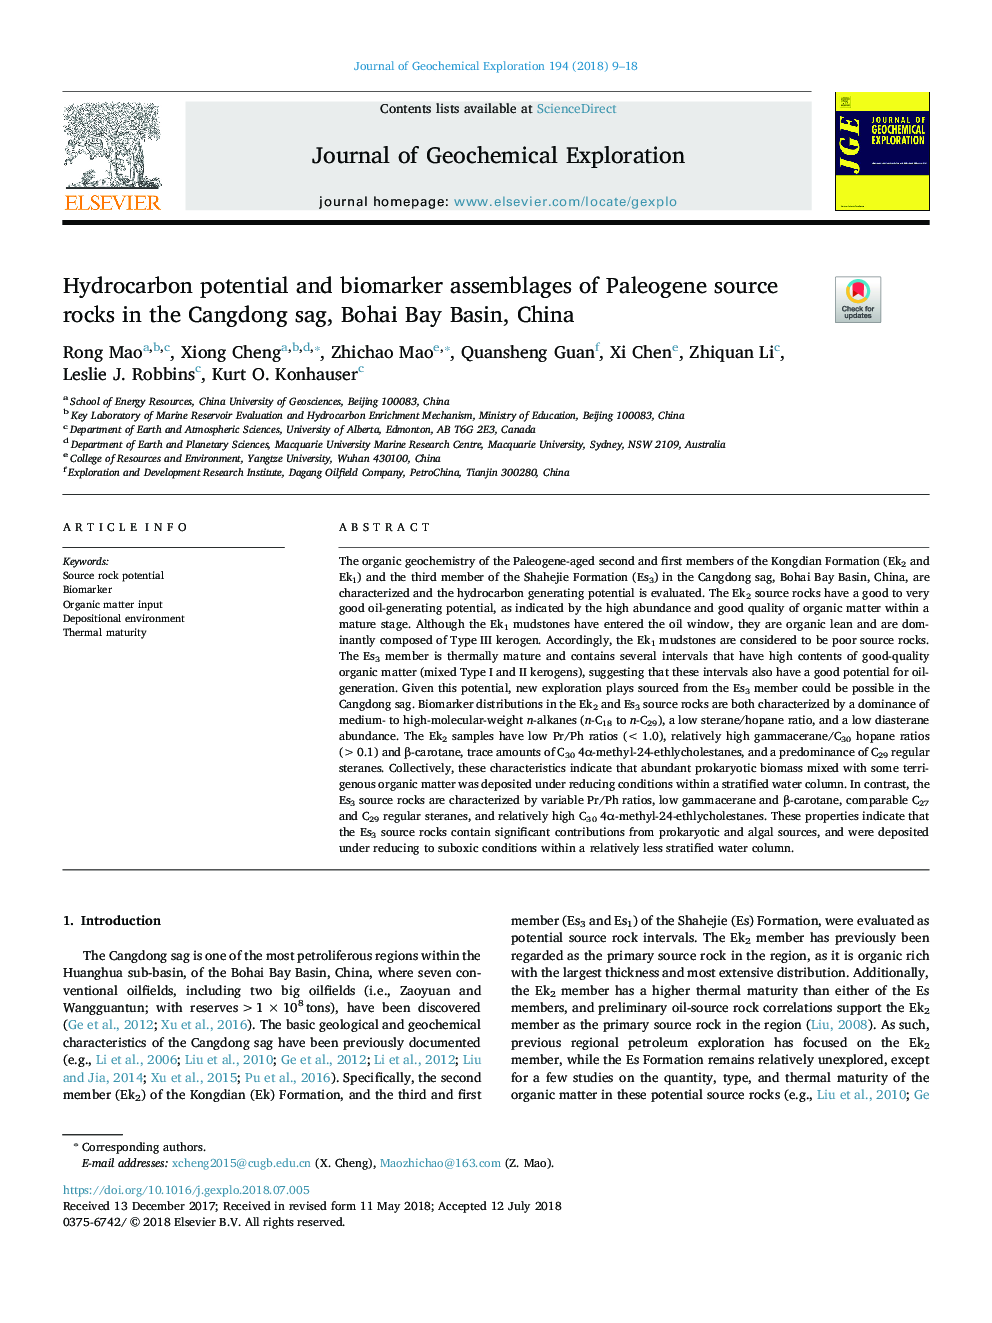 Hydrocarbon potential and biomarker assemblages of Paleogene source rocks in the Cangdong sag, Bohai Bay Basin, China